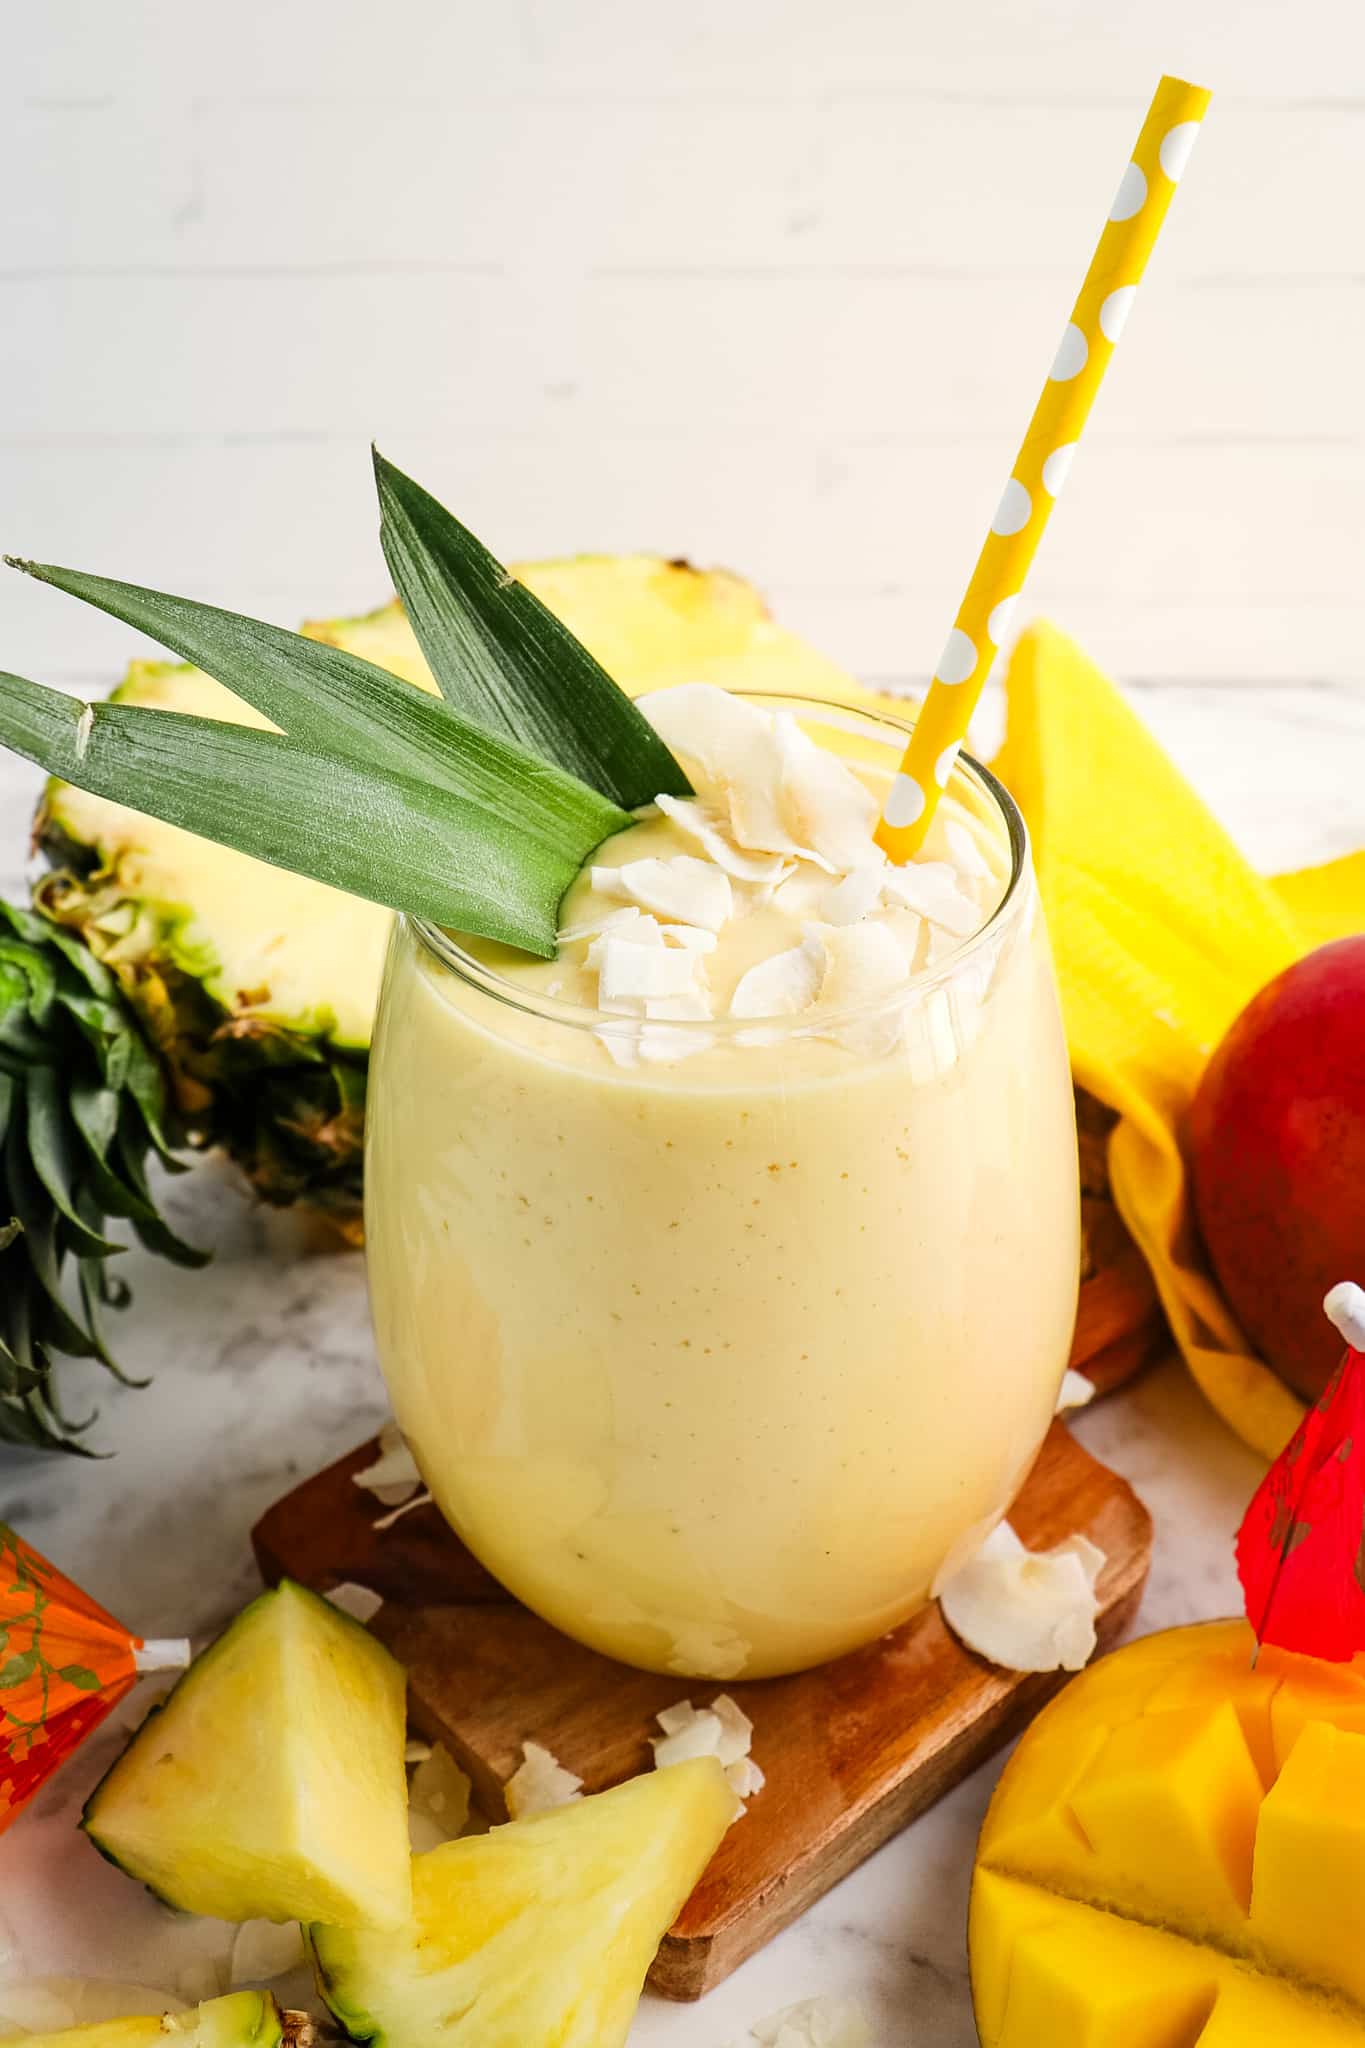 Mango pineapple smoothie garnished with pineapple leaves, coconut flakes and topped with a yellow straw.